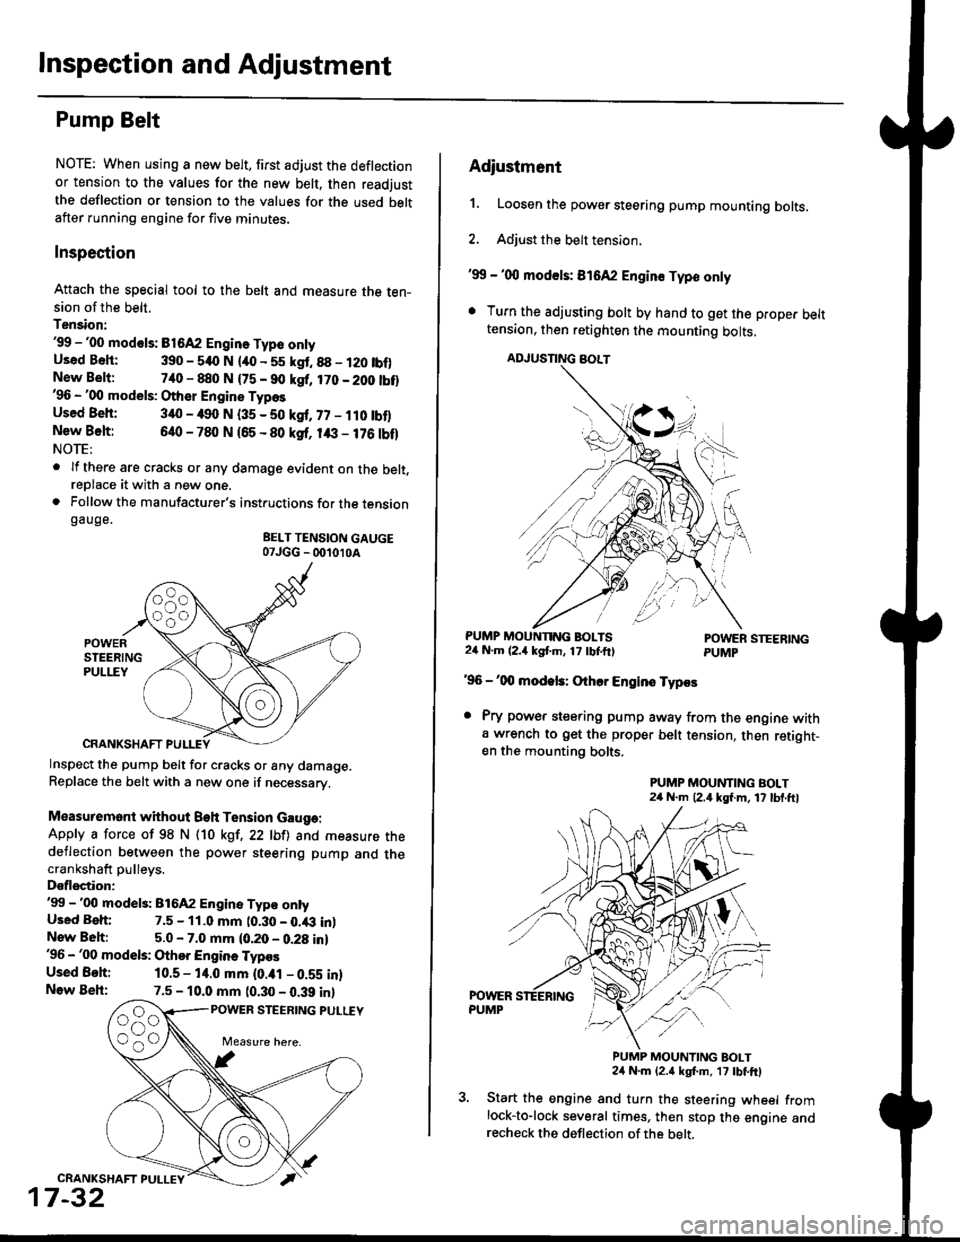 HONDA CIVIC 2000 6.G Service Manual Inspection and Adjustment
Pump Belt
NOTE: When using a new belt, first adjust the deflection
or tension to the values for the new belt, then readjust
the deflection or tension to the values for the us